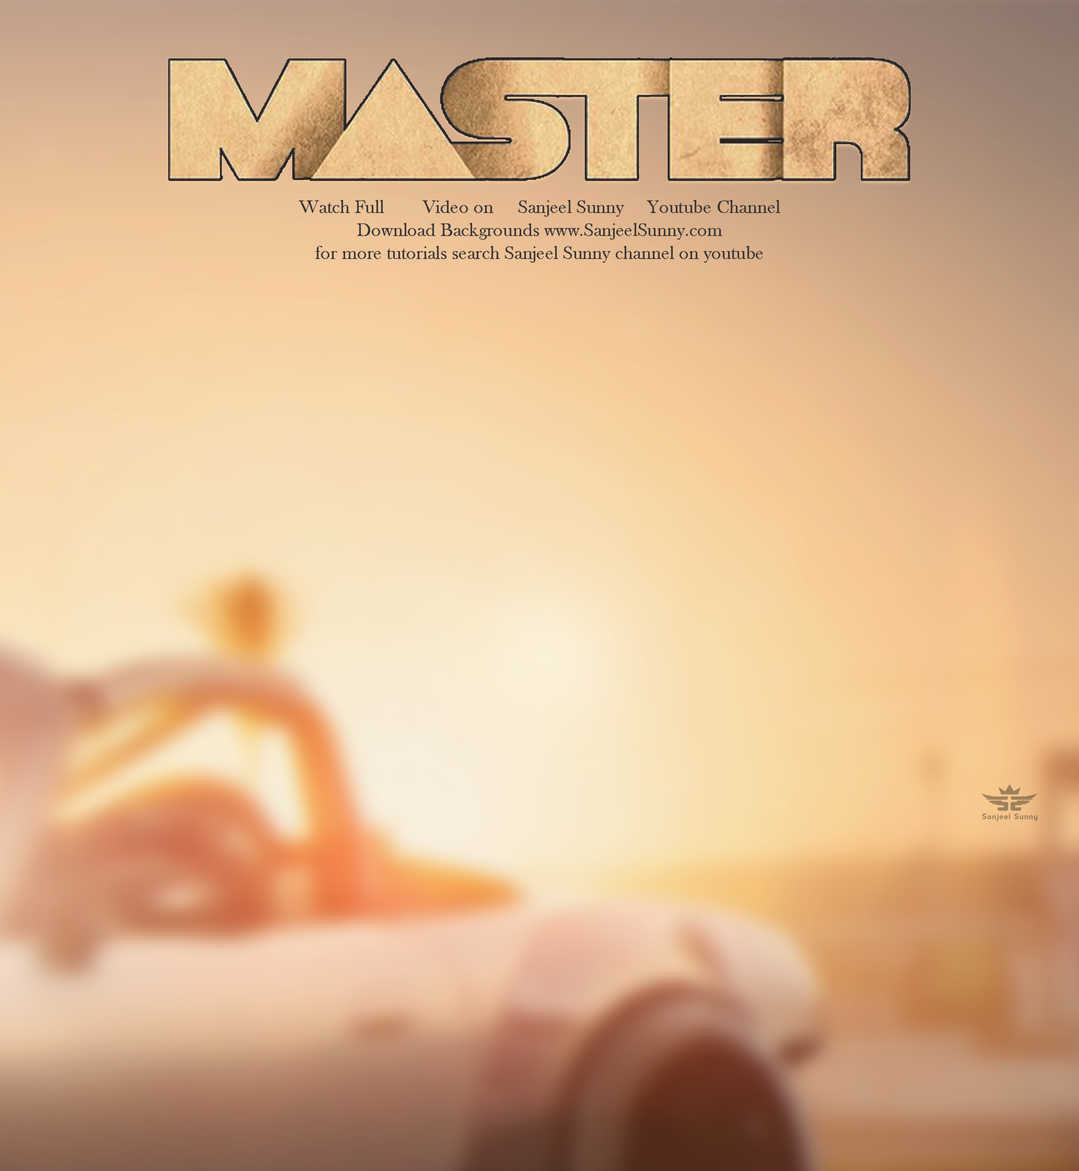 Master Movie Poster HD Background Free Download Latest Movie Poster Background Download